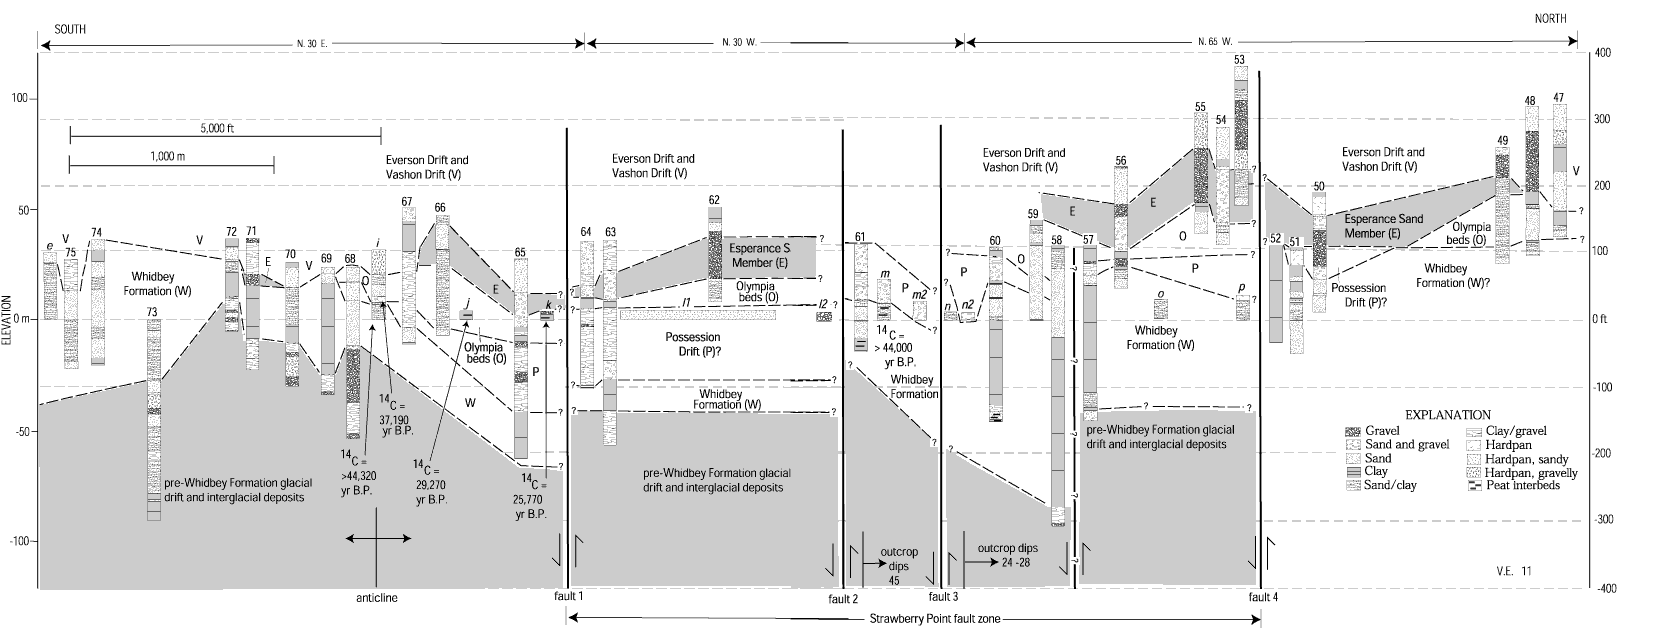 32. Interpretive stratigraphic correlation diagram parallel to coast of Strawberry Point crossing Strawberry Point fault zone